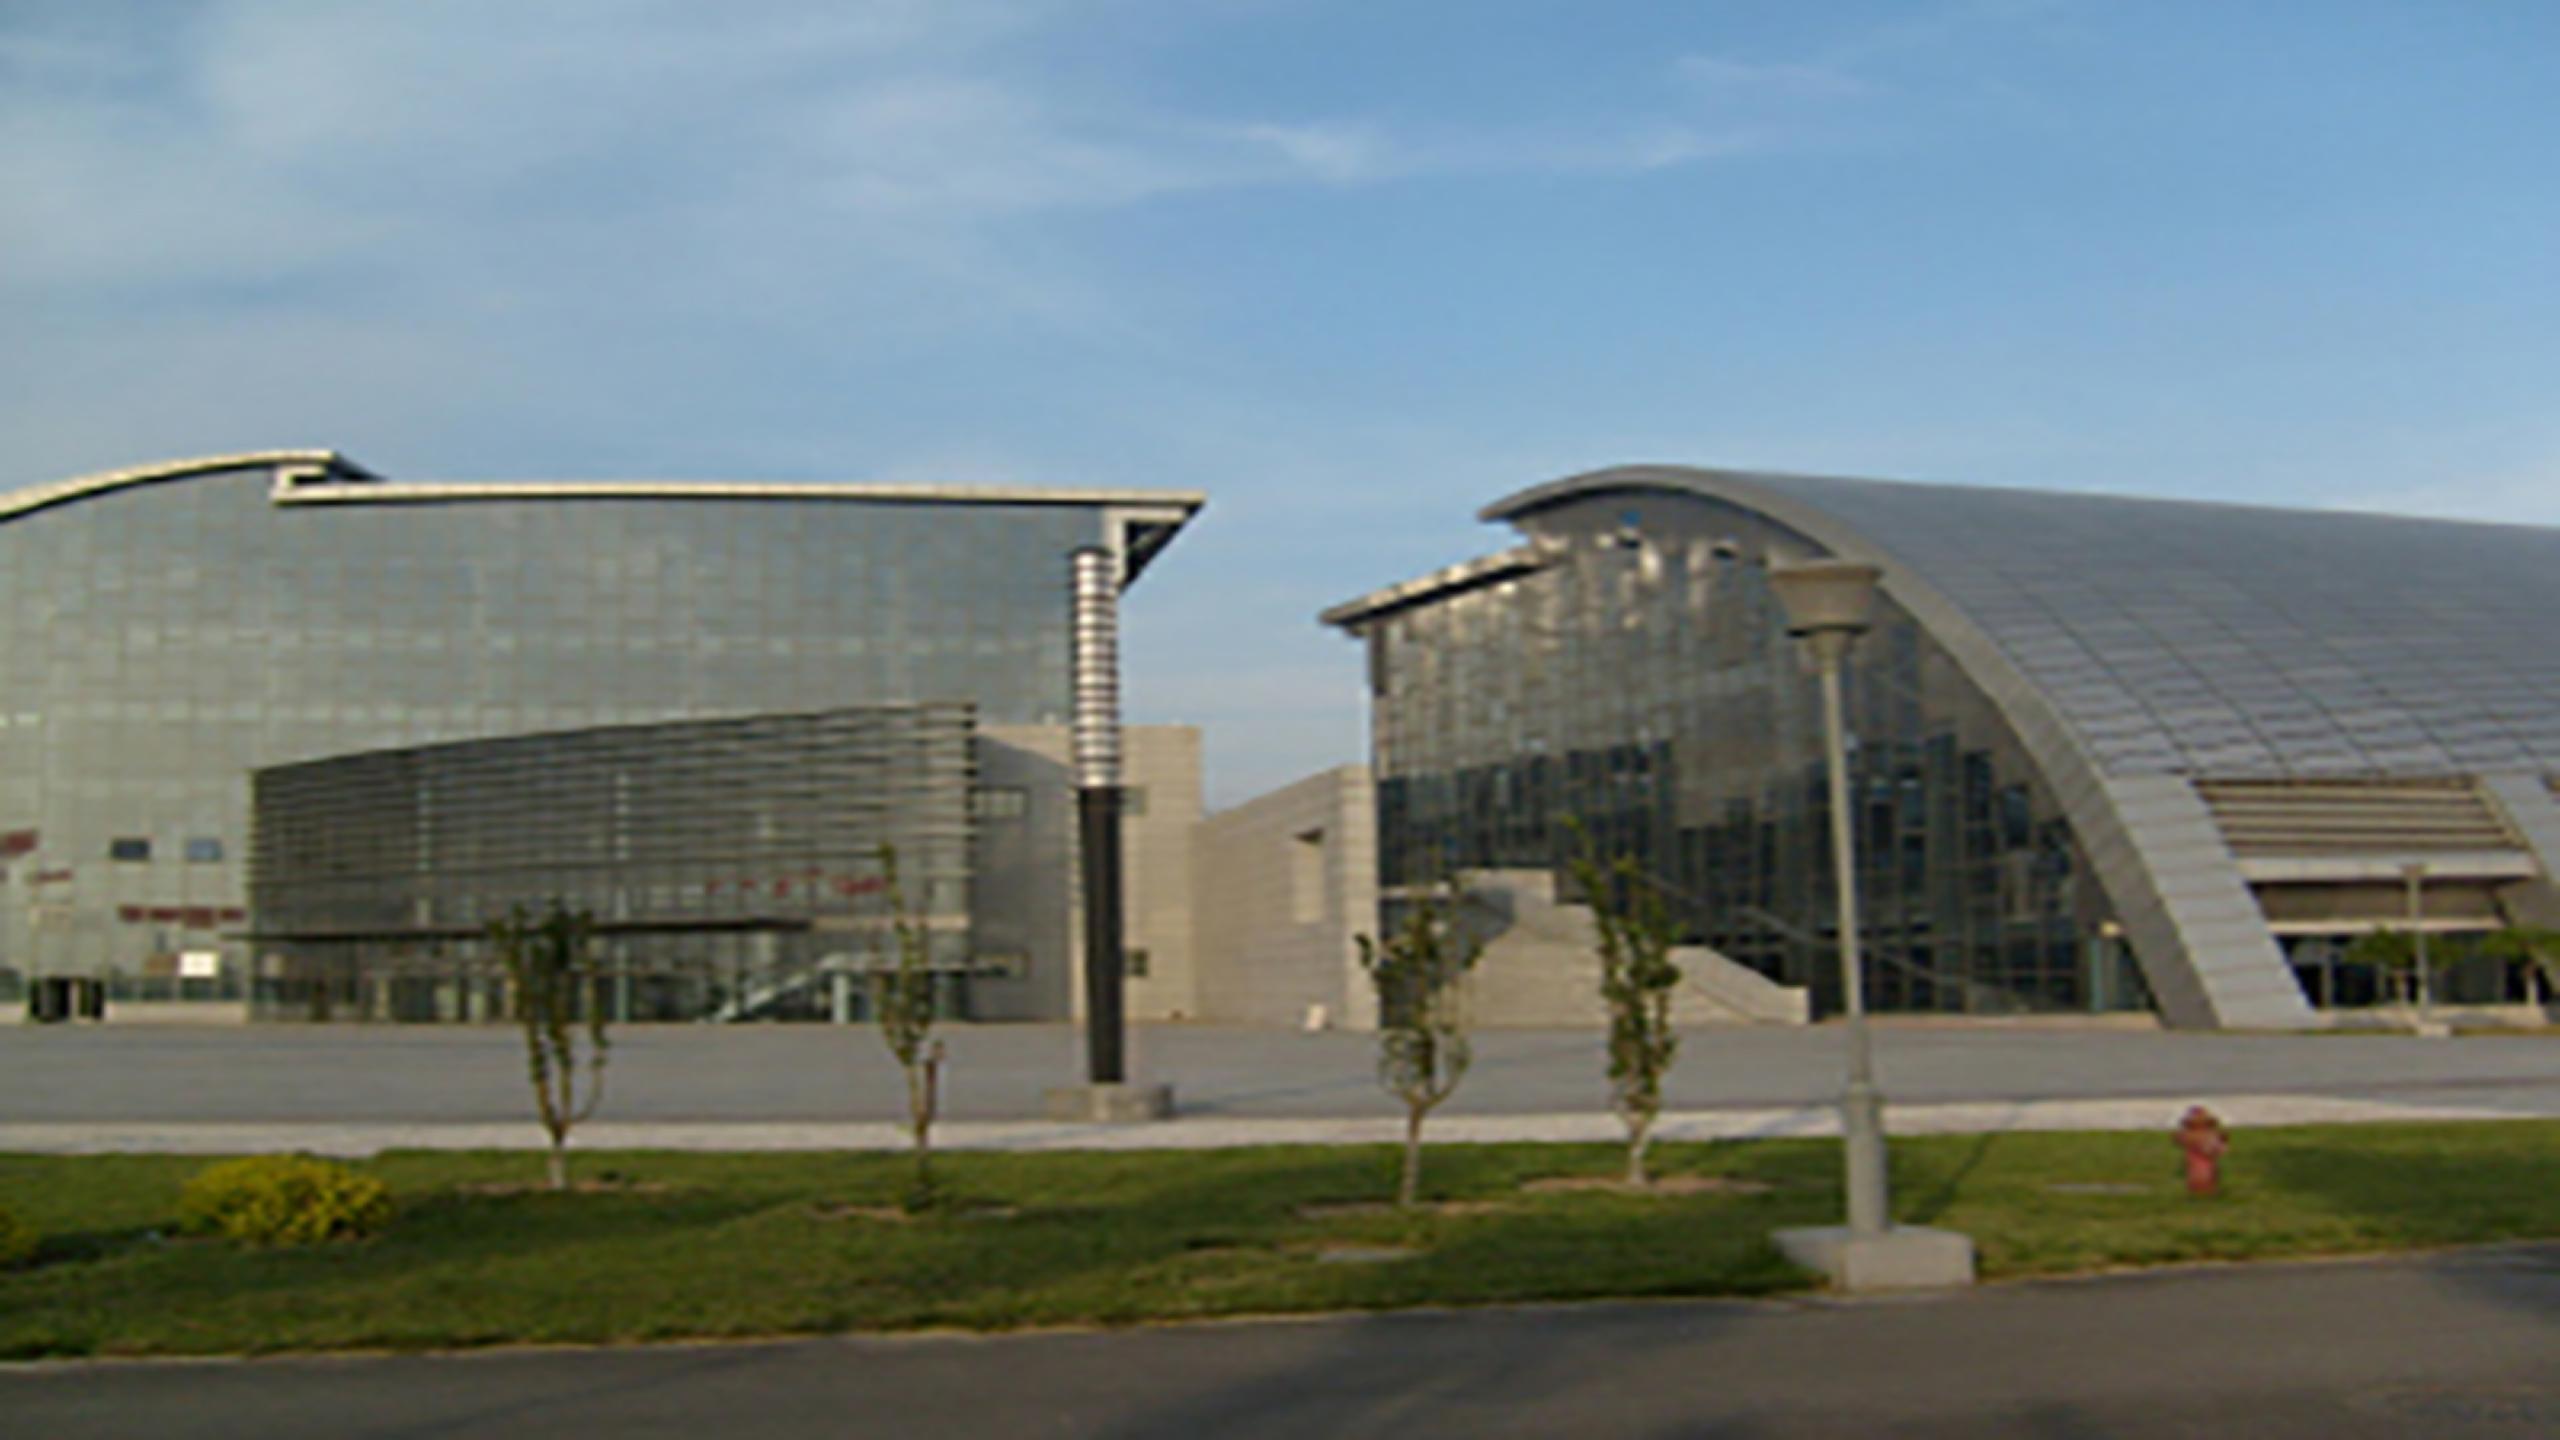 Tianjin Paralympic Federation Sports Center